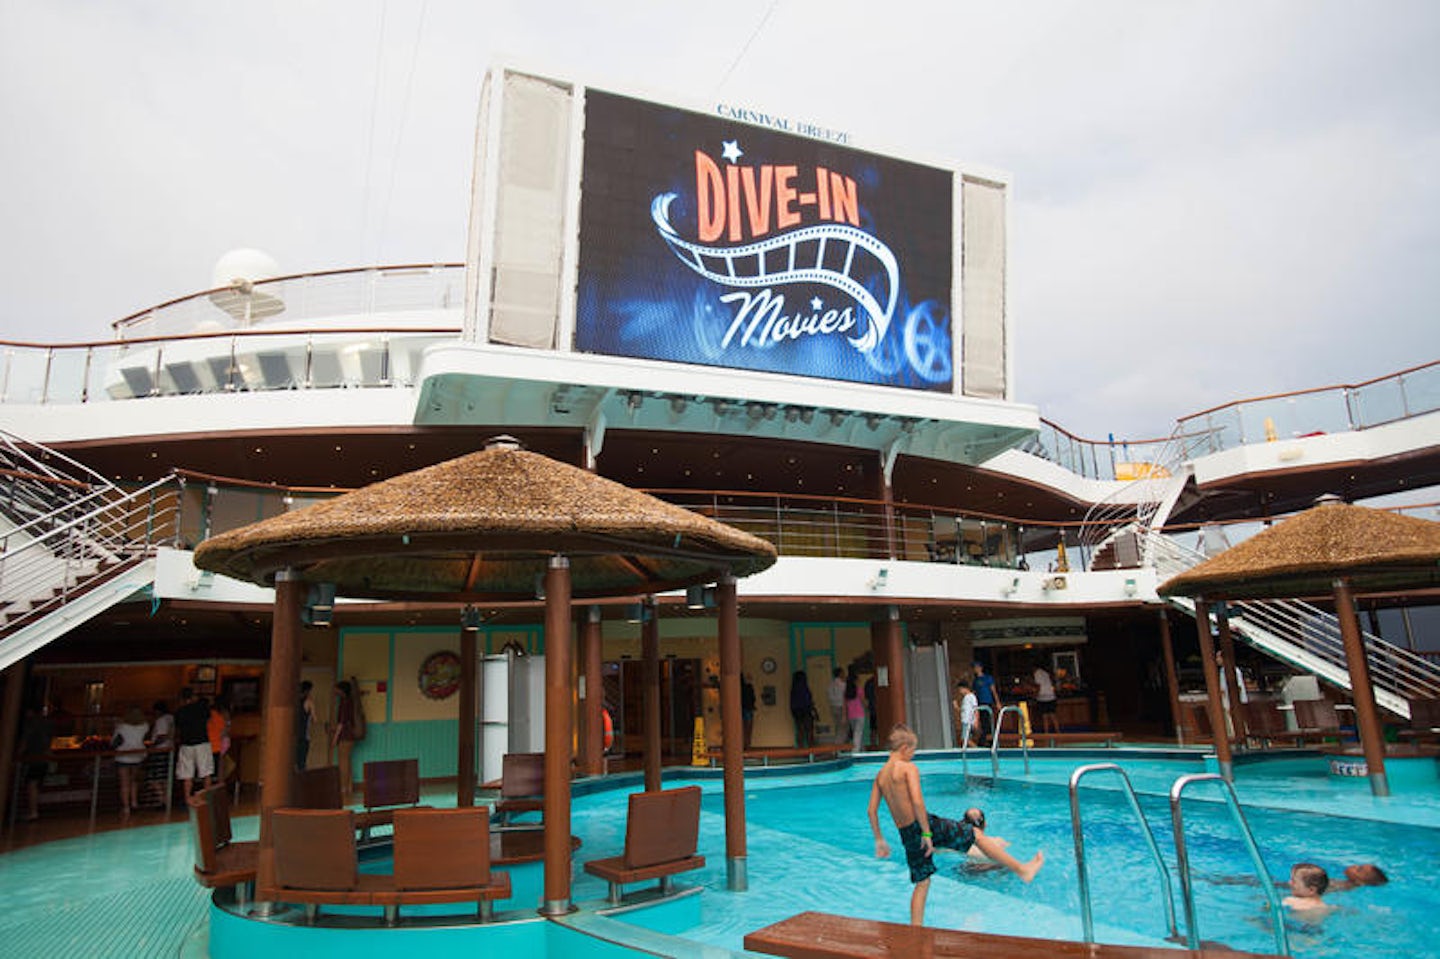 Outdoor Movie Screen on Carnival Breeze